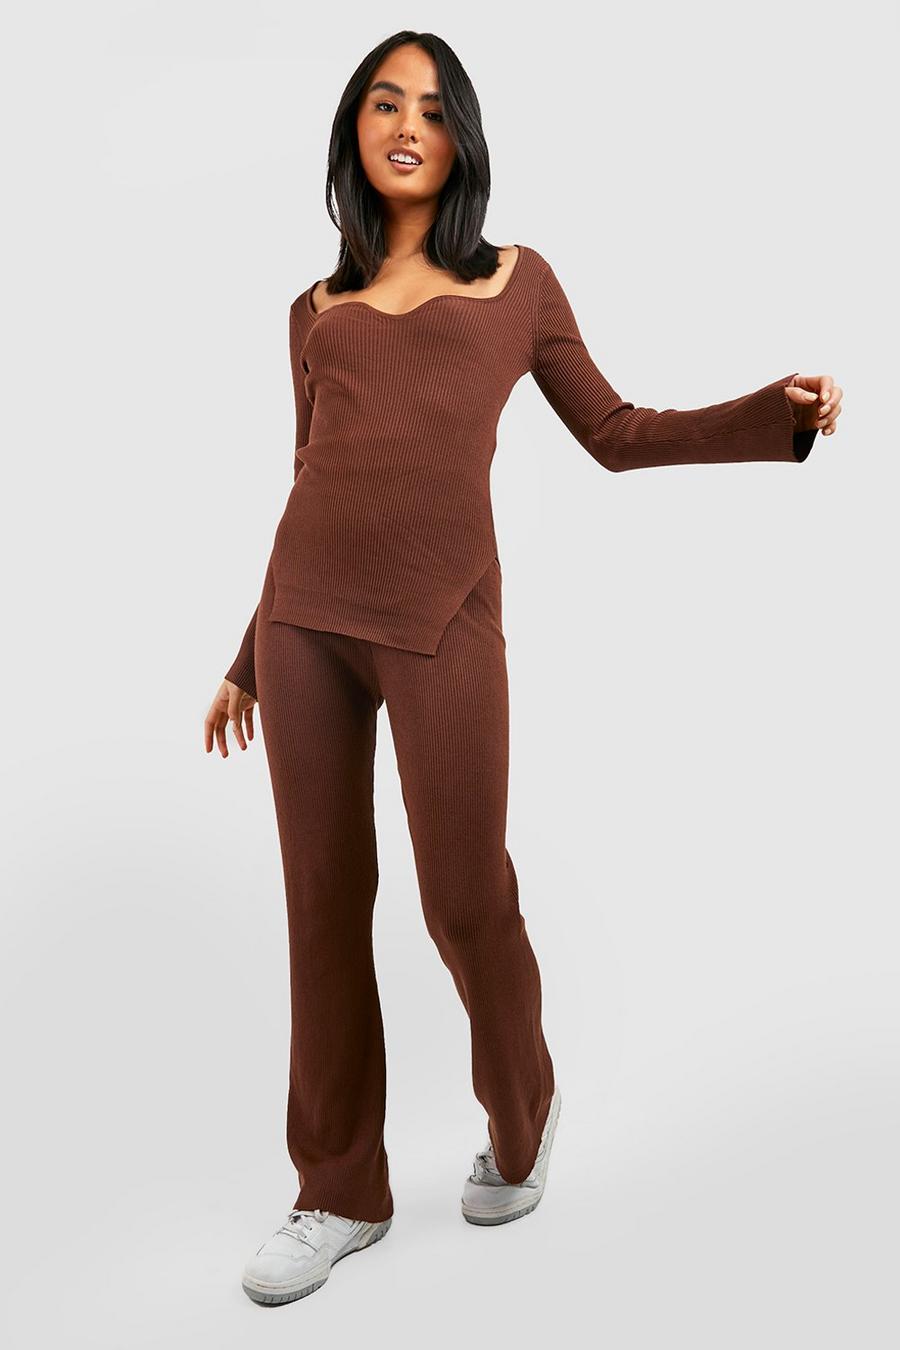 Chocolate marron Rib Knitted Relaxed Wide Leg Set